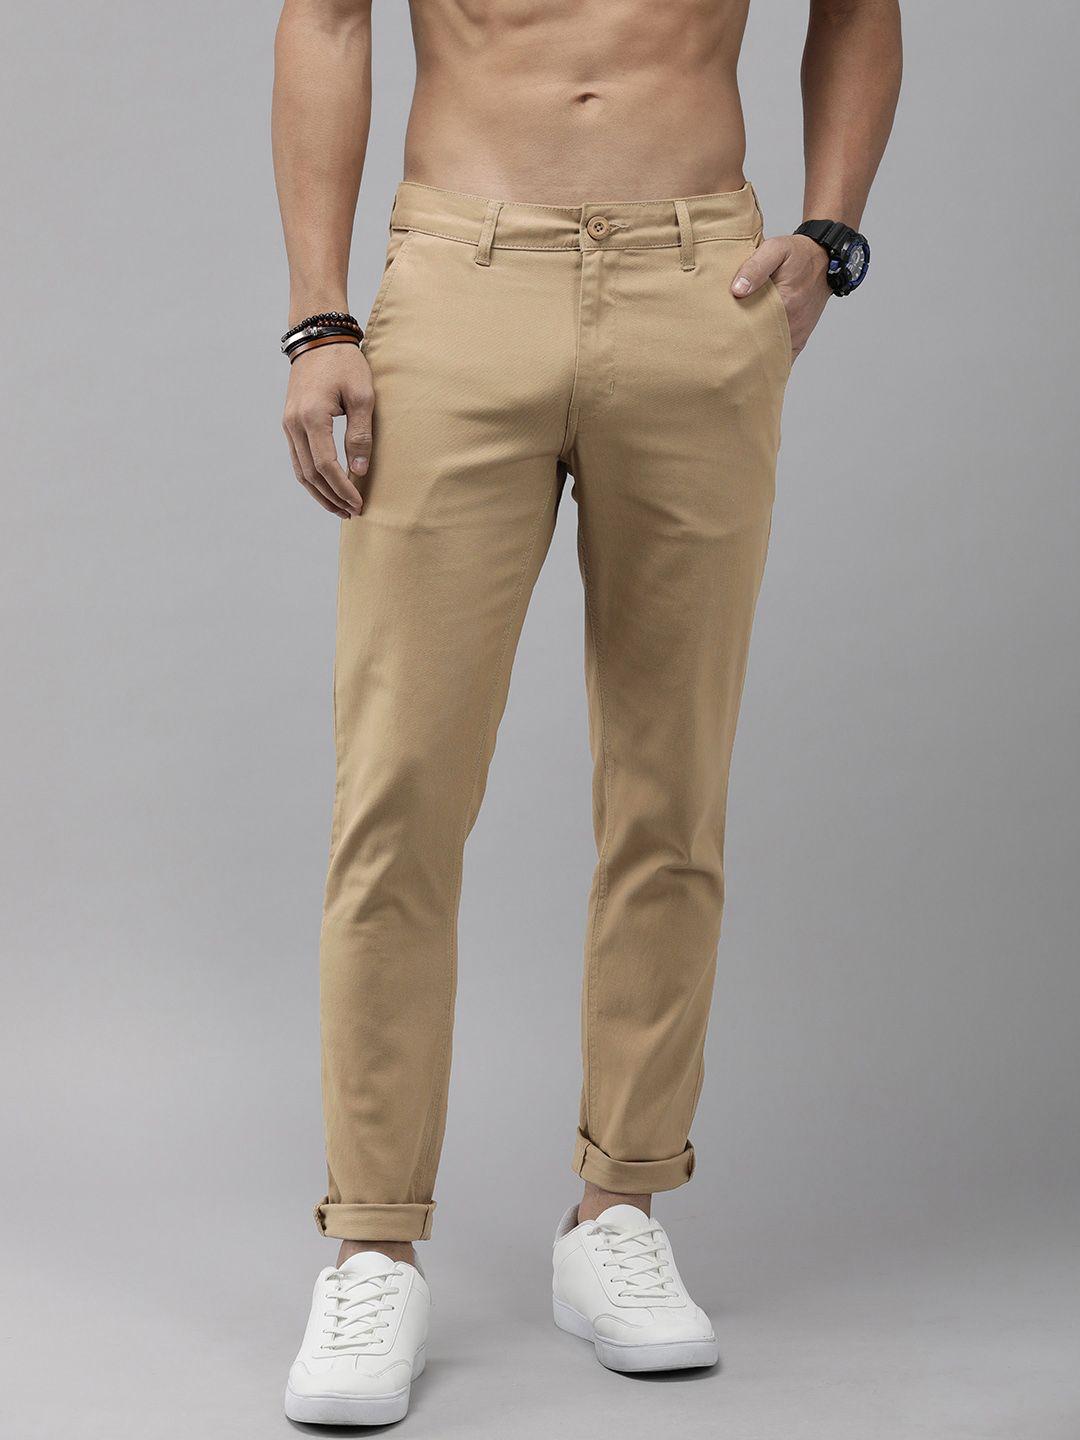 roadster-classic-slim-fit-cotton-chinos-trousers